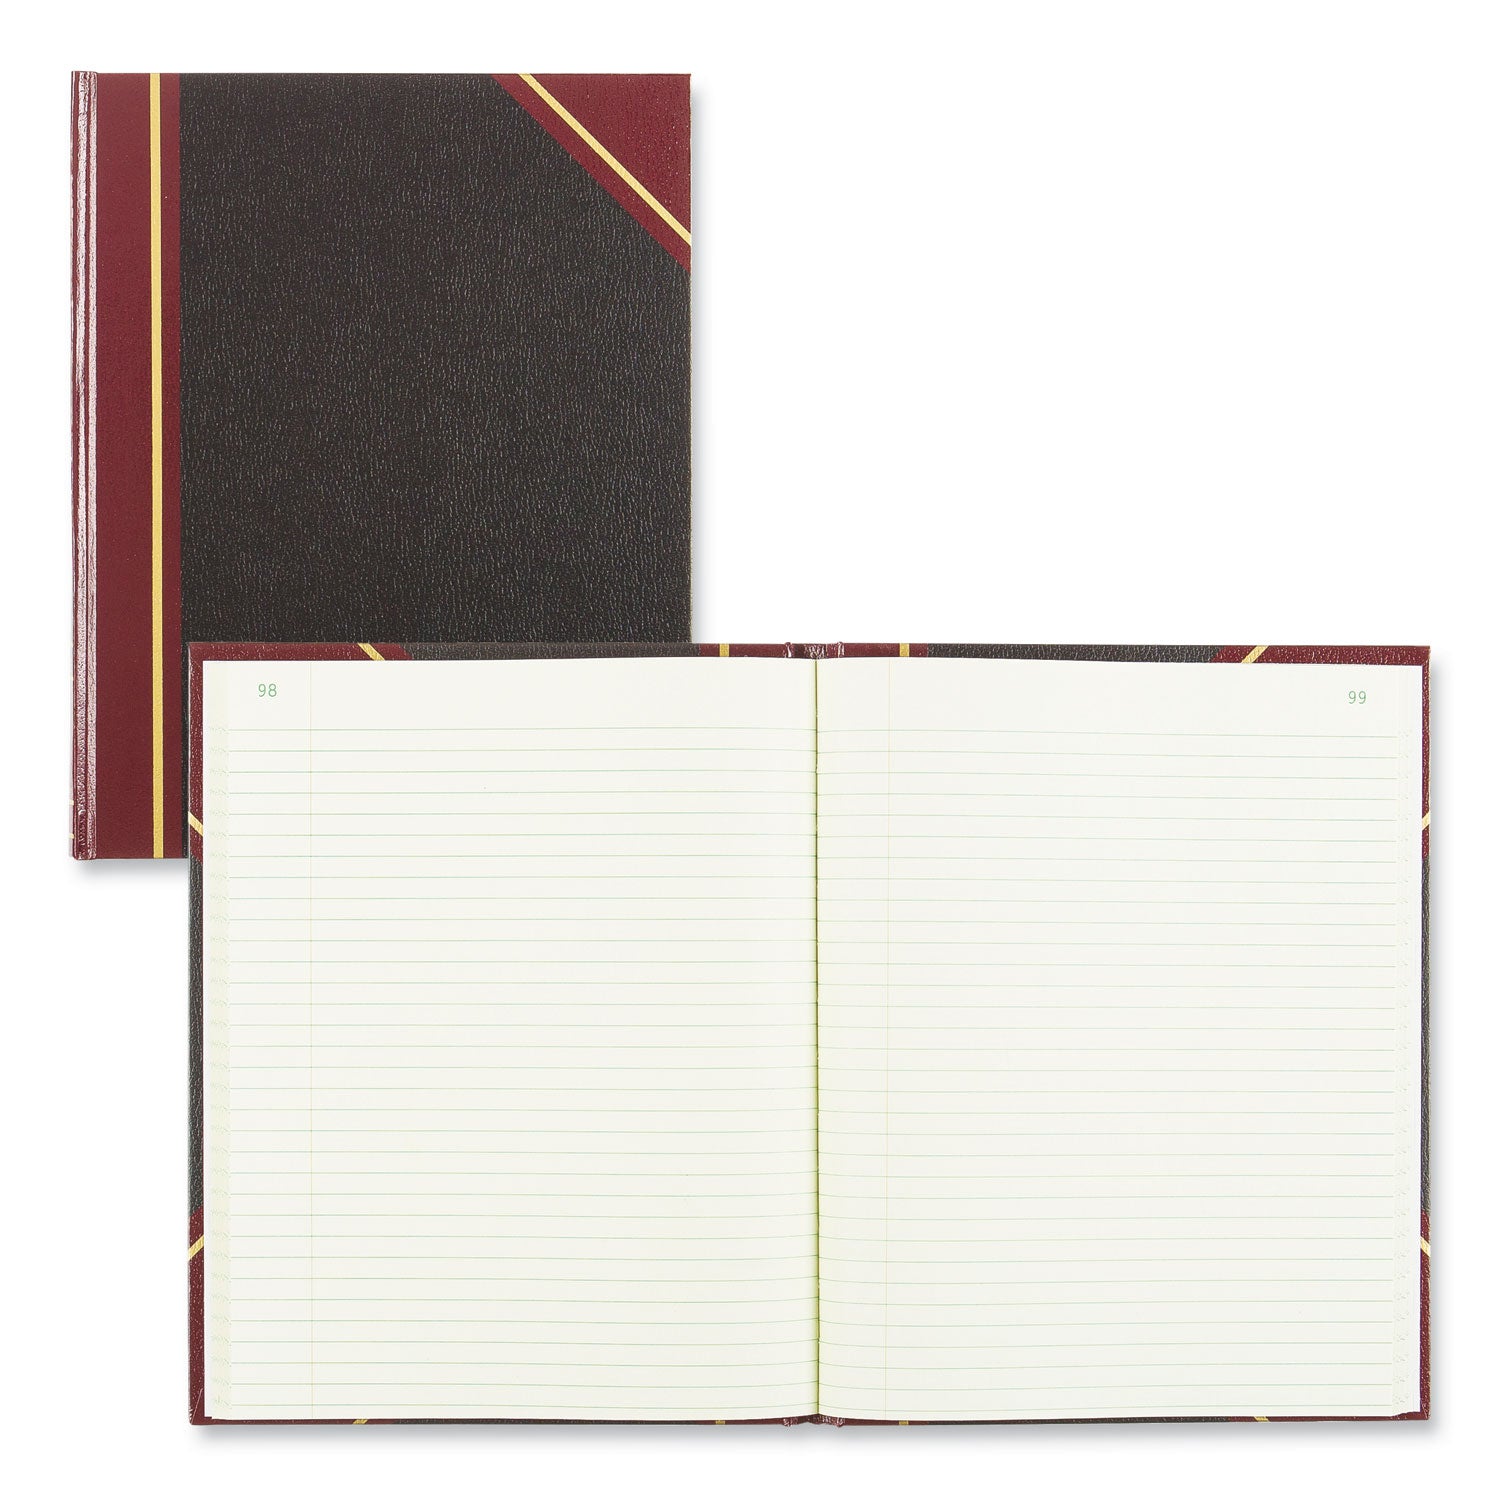 Texthide Eye-Ease Record Book, Black/Burgundy/Gold Cover, 10.38 x 8.38 Sheets, 300 Sheets/Book - 